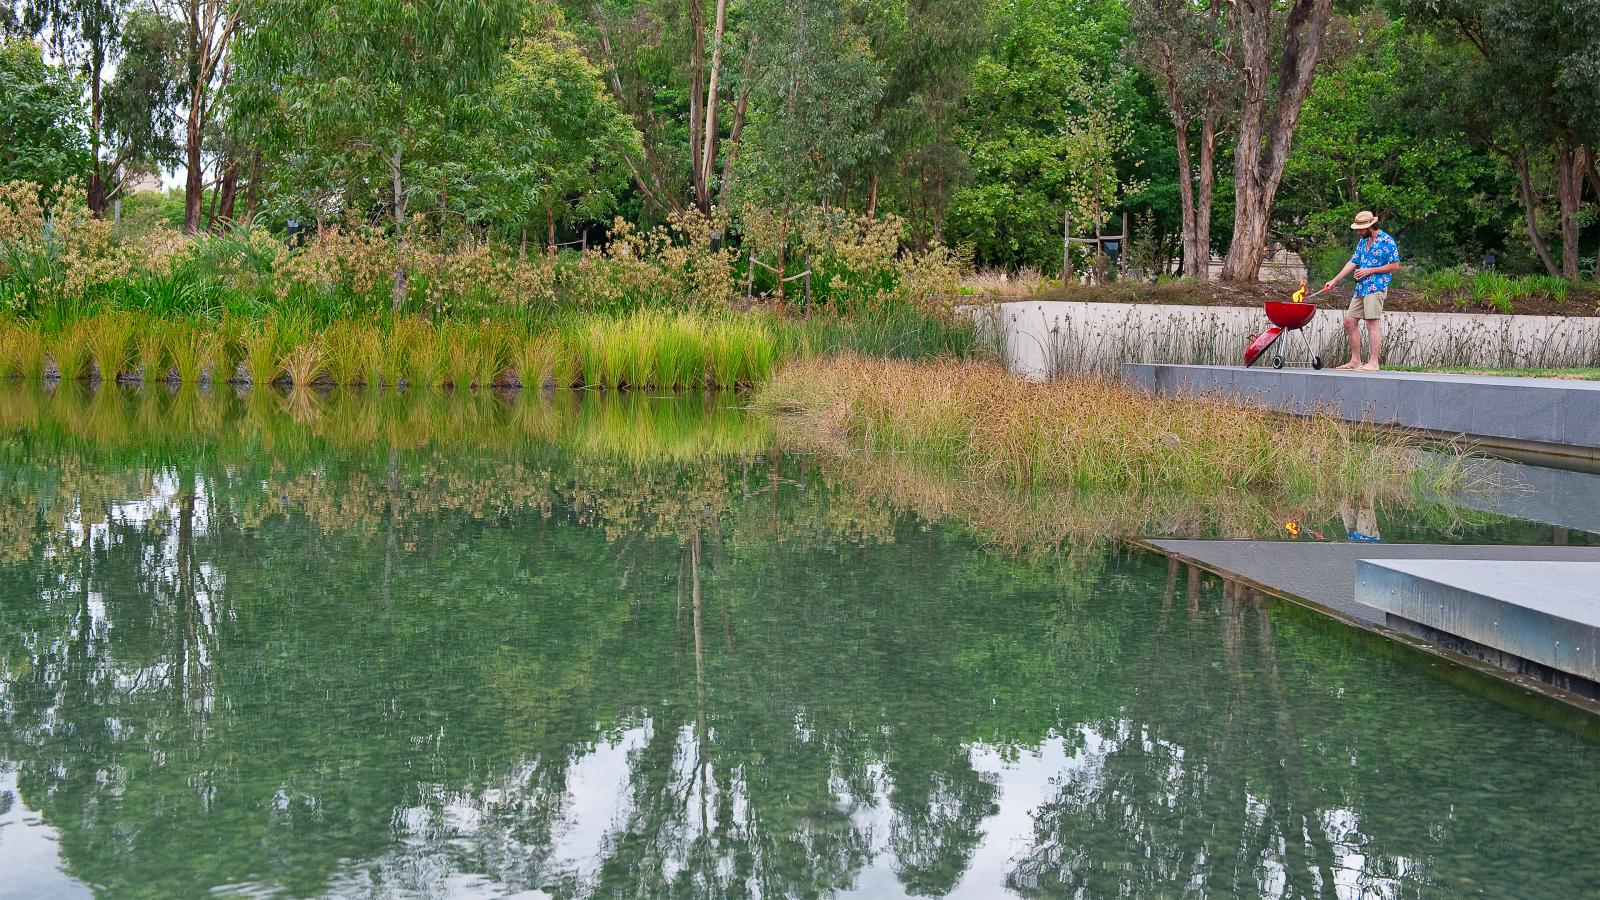 A person wearing a hat and blue shirt stands beside a young child in a red jacket, both leaning over a railing to look at a pond in the Australian Garden. The pond is surrounded by tall grasses and trees, which are reflected in the clear water. It is a serene, nature-filled scene.